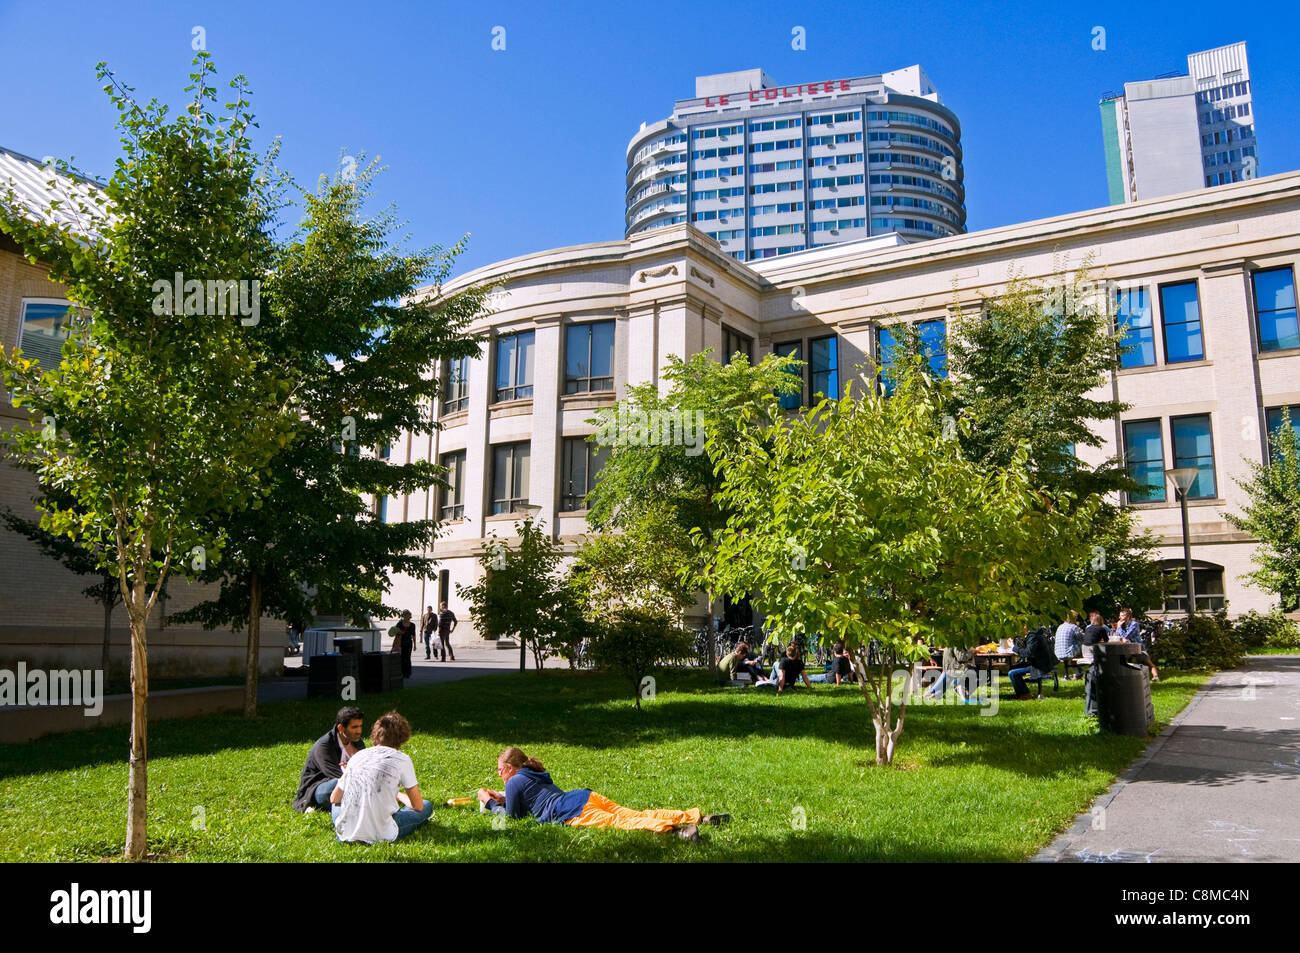 Uqam university Campus located next to Place des Arts downtown Montreal Stock Photo